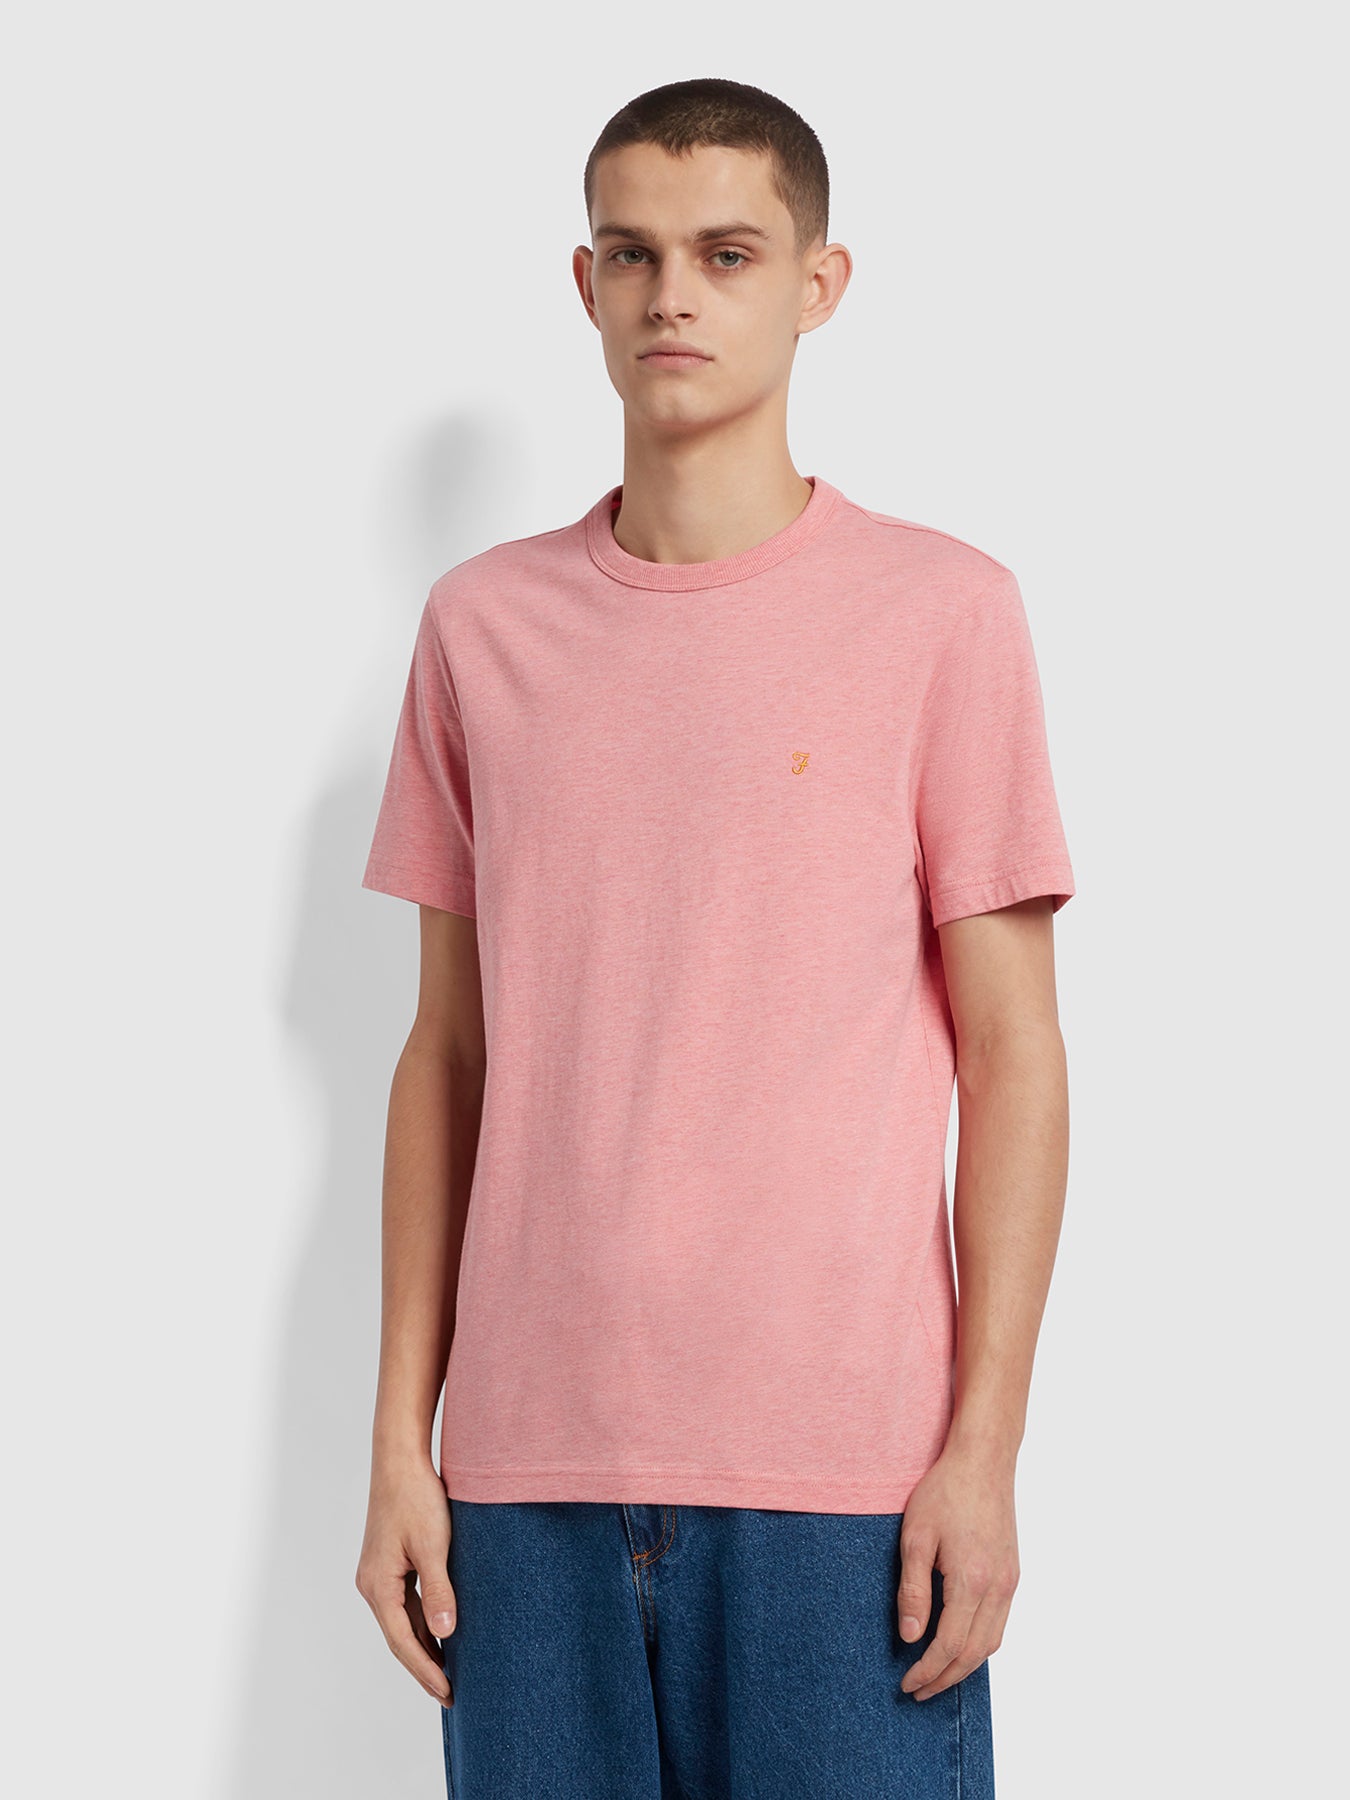 View Danny Slim Fit Organic Cotton TShirt In Palisade Pink Marl information